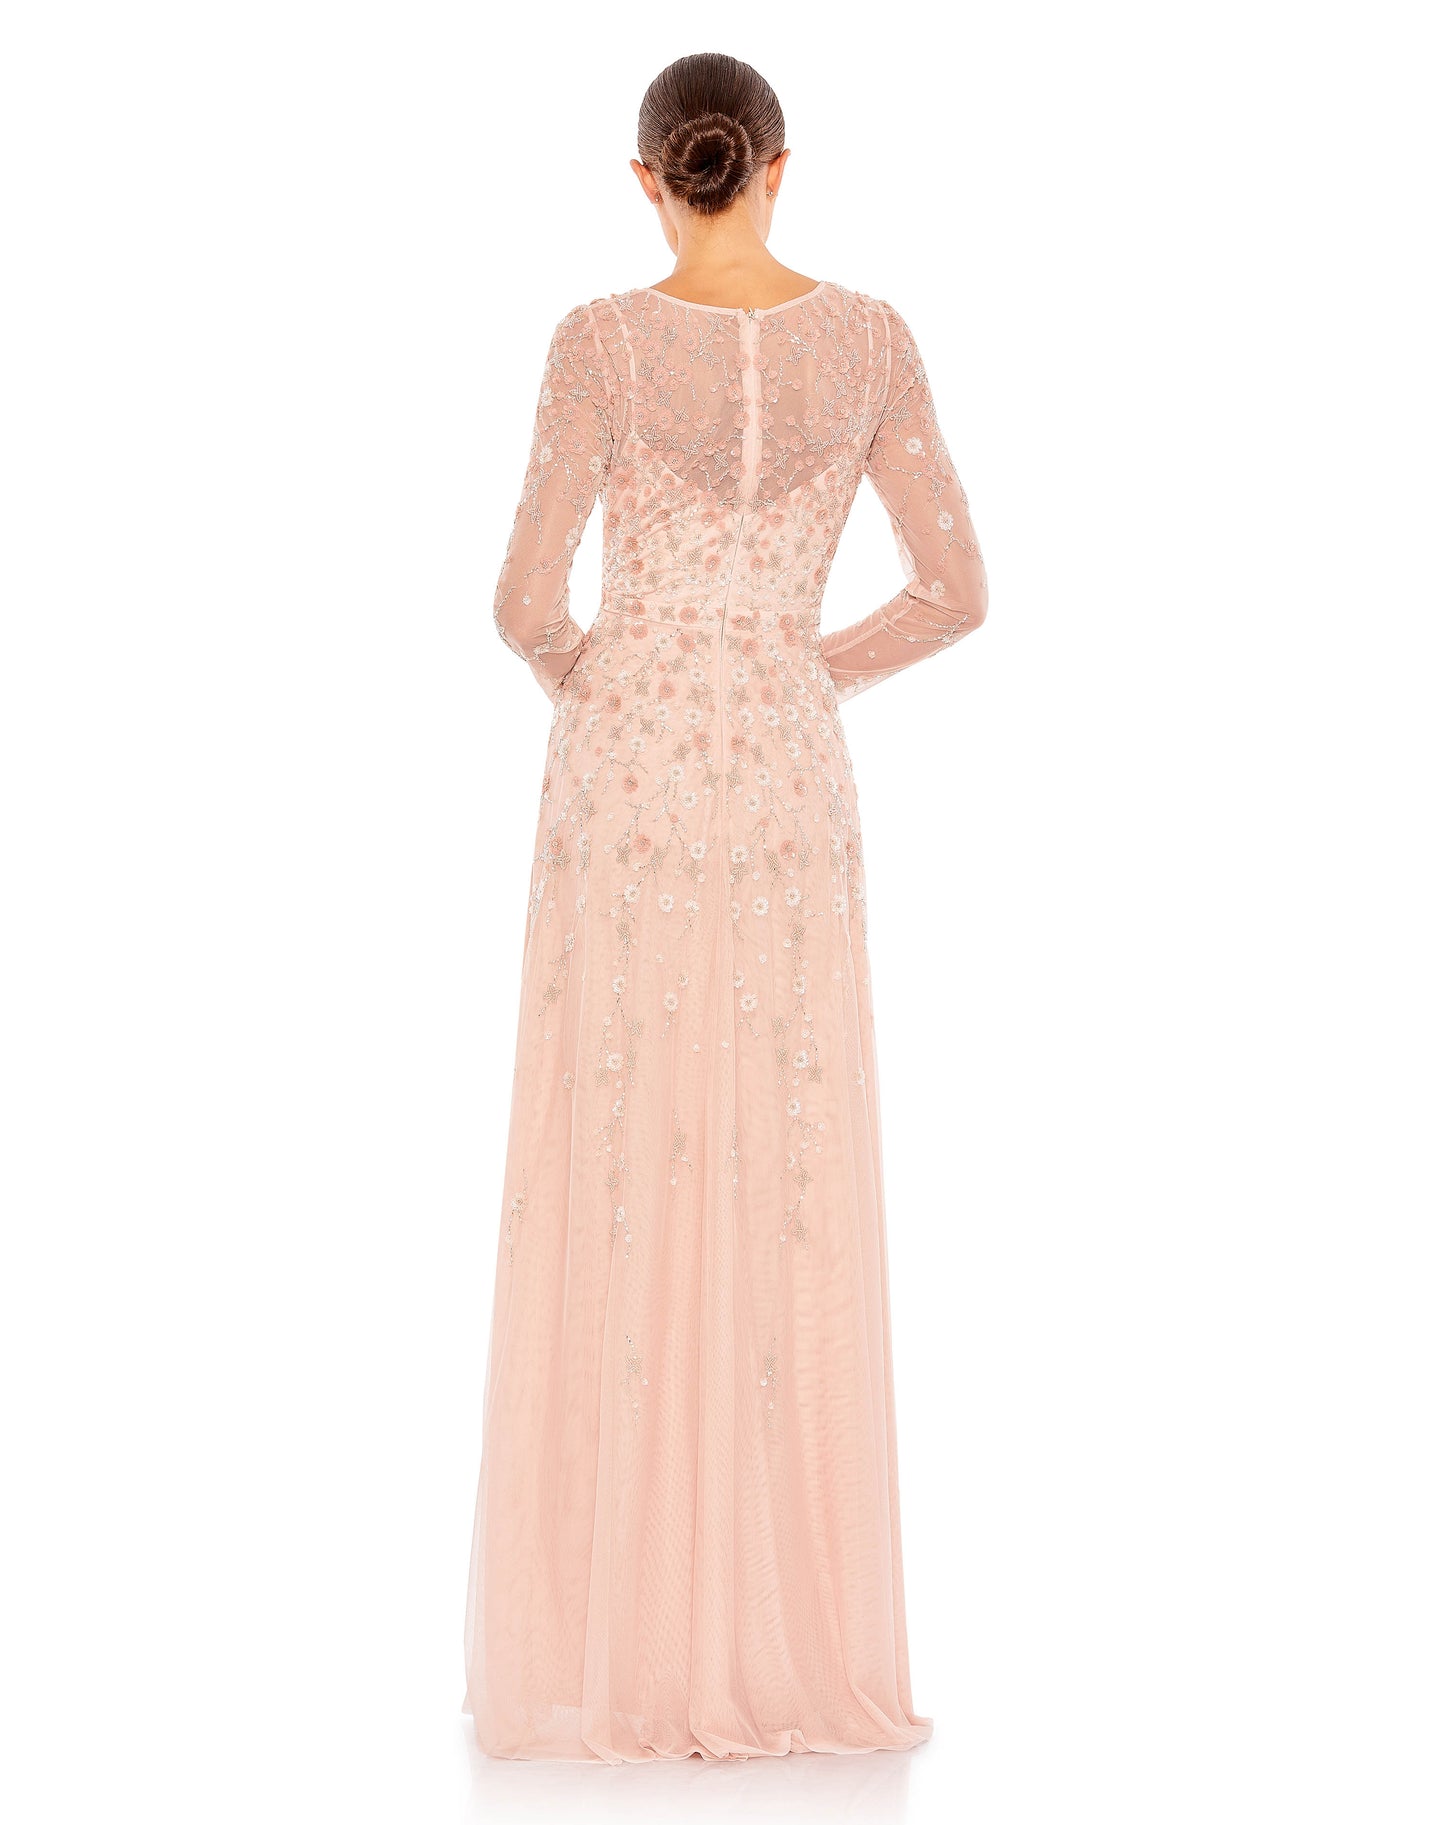 This gorgeous surplice gown is crafted with a sheer mesh overlay adorned with 3D floral embellishments across the bodice, arms, and skirt. With a v-neckline, sheer long sleeves, and a flowing skirt, this dress is an elegant choice for your next event. Mac